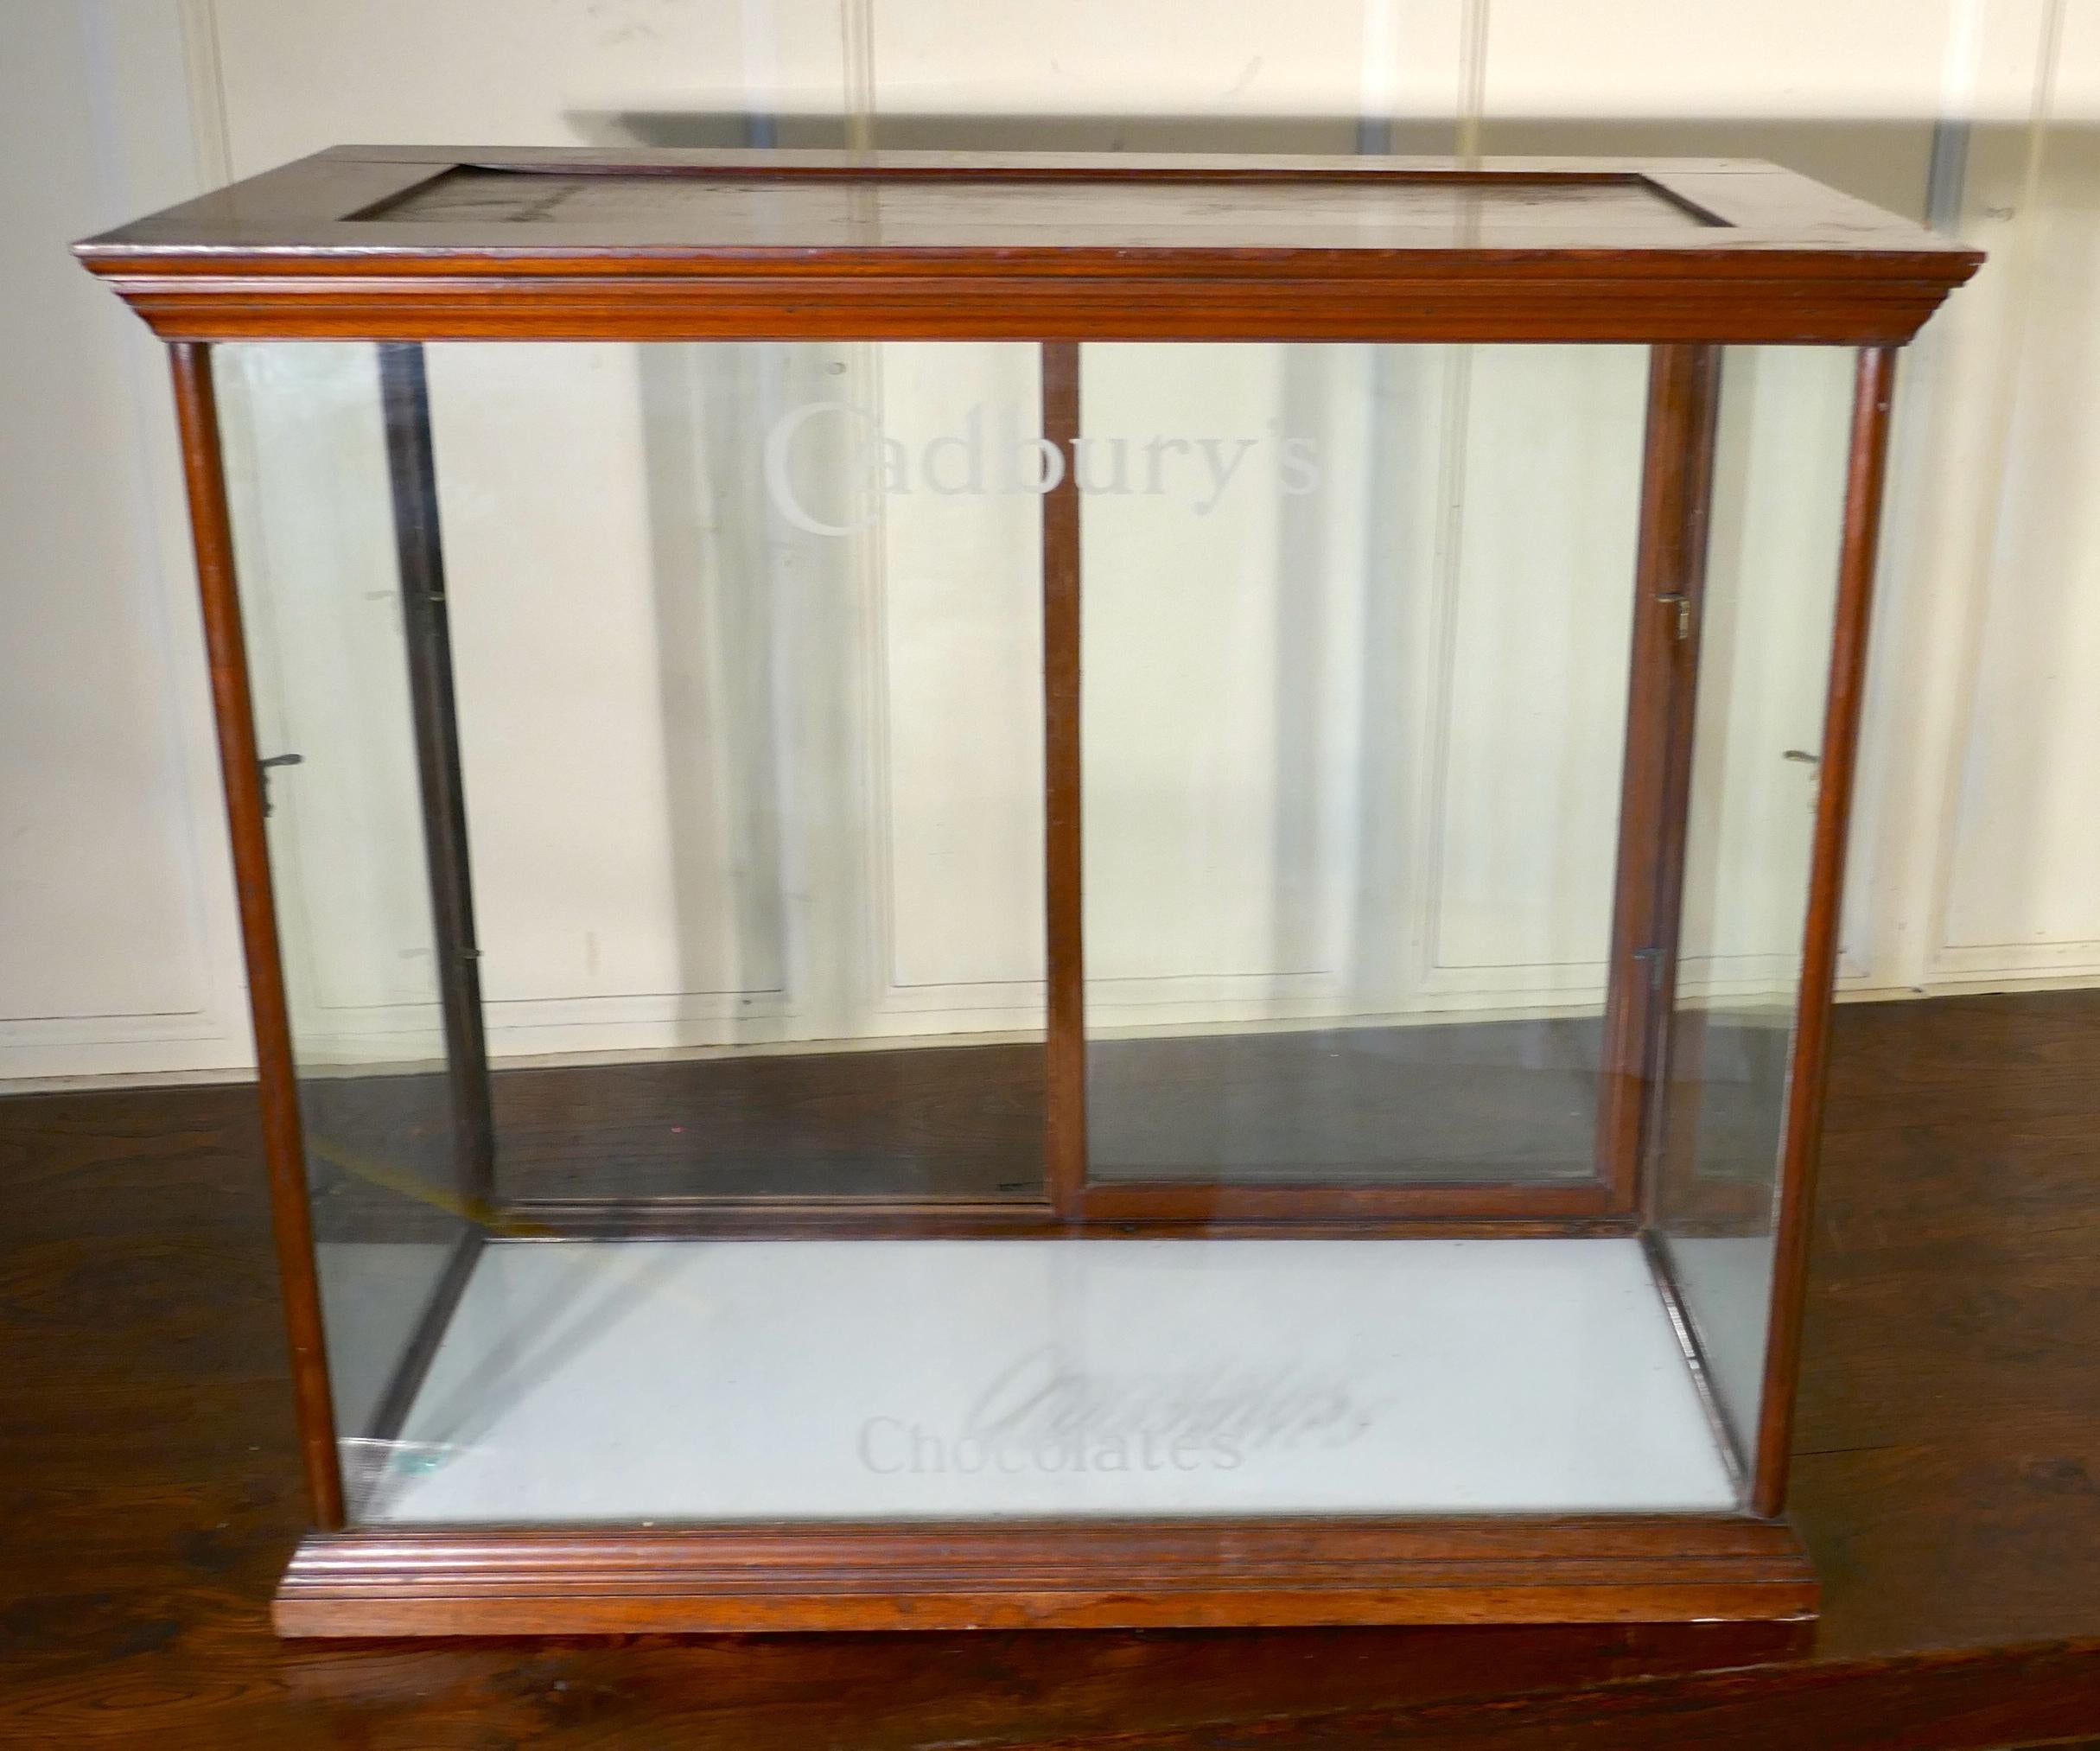 Edwardian Cadbury’s counter top sweet shop display cabinet

This glazed shop display cabinet is made mahogany, the glass has etched lettering on the front of the cabinets saying Cadbury’s at the top and chocolates at the bottom

The cabinet has